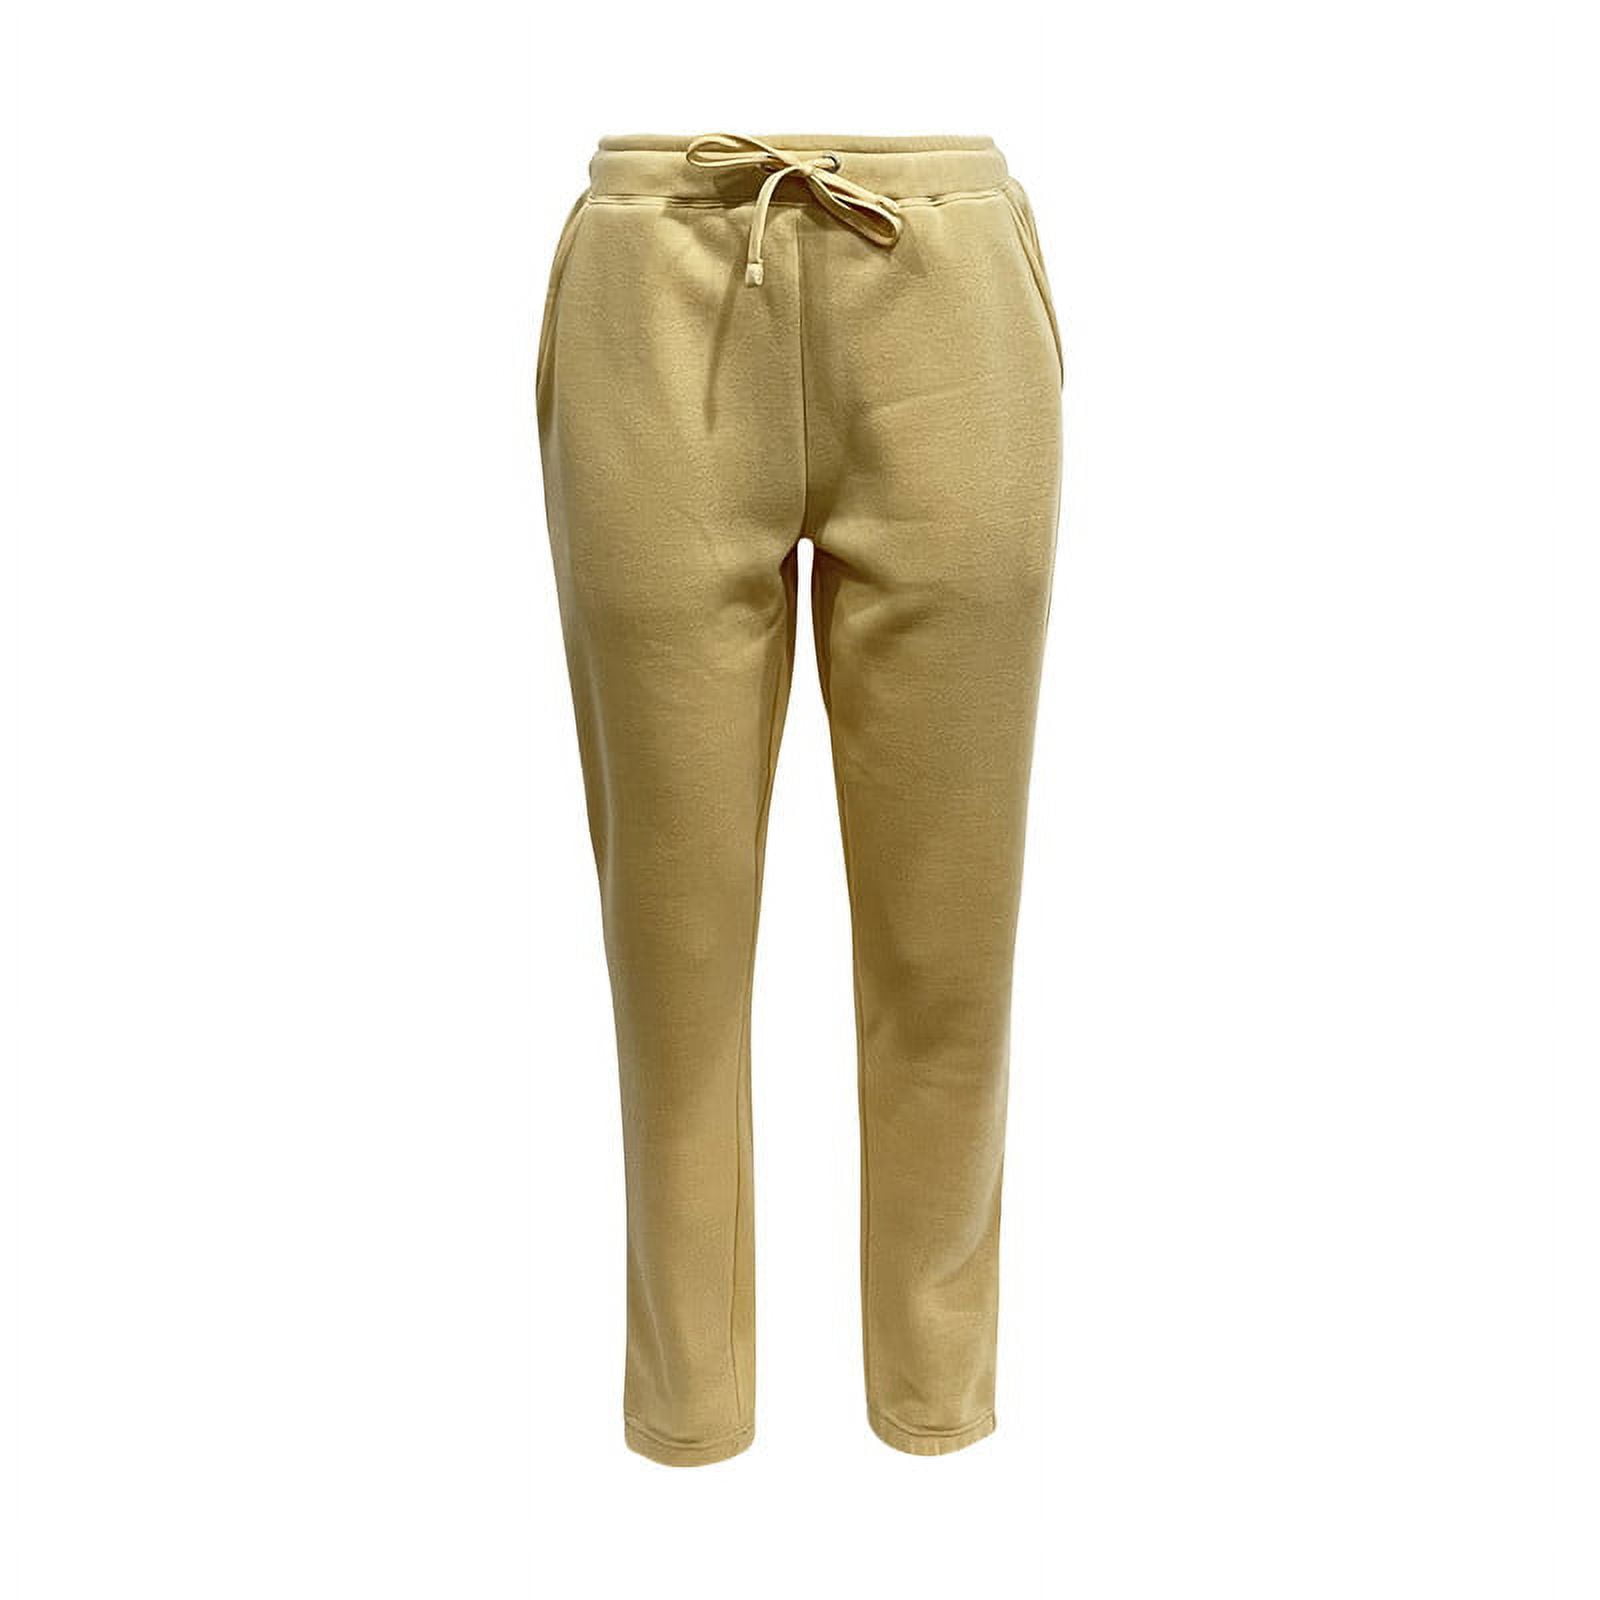 GOLD'S‎ GYM POLYESTER CORE TRAINING WORK OUT PANTS medium | Core training,  Workout, Gym